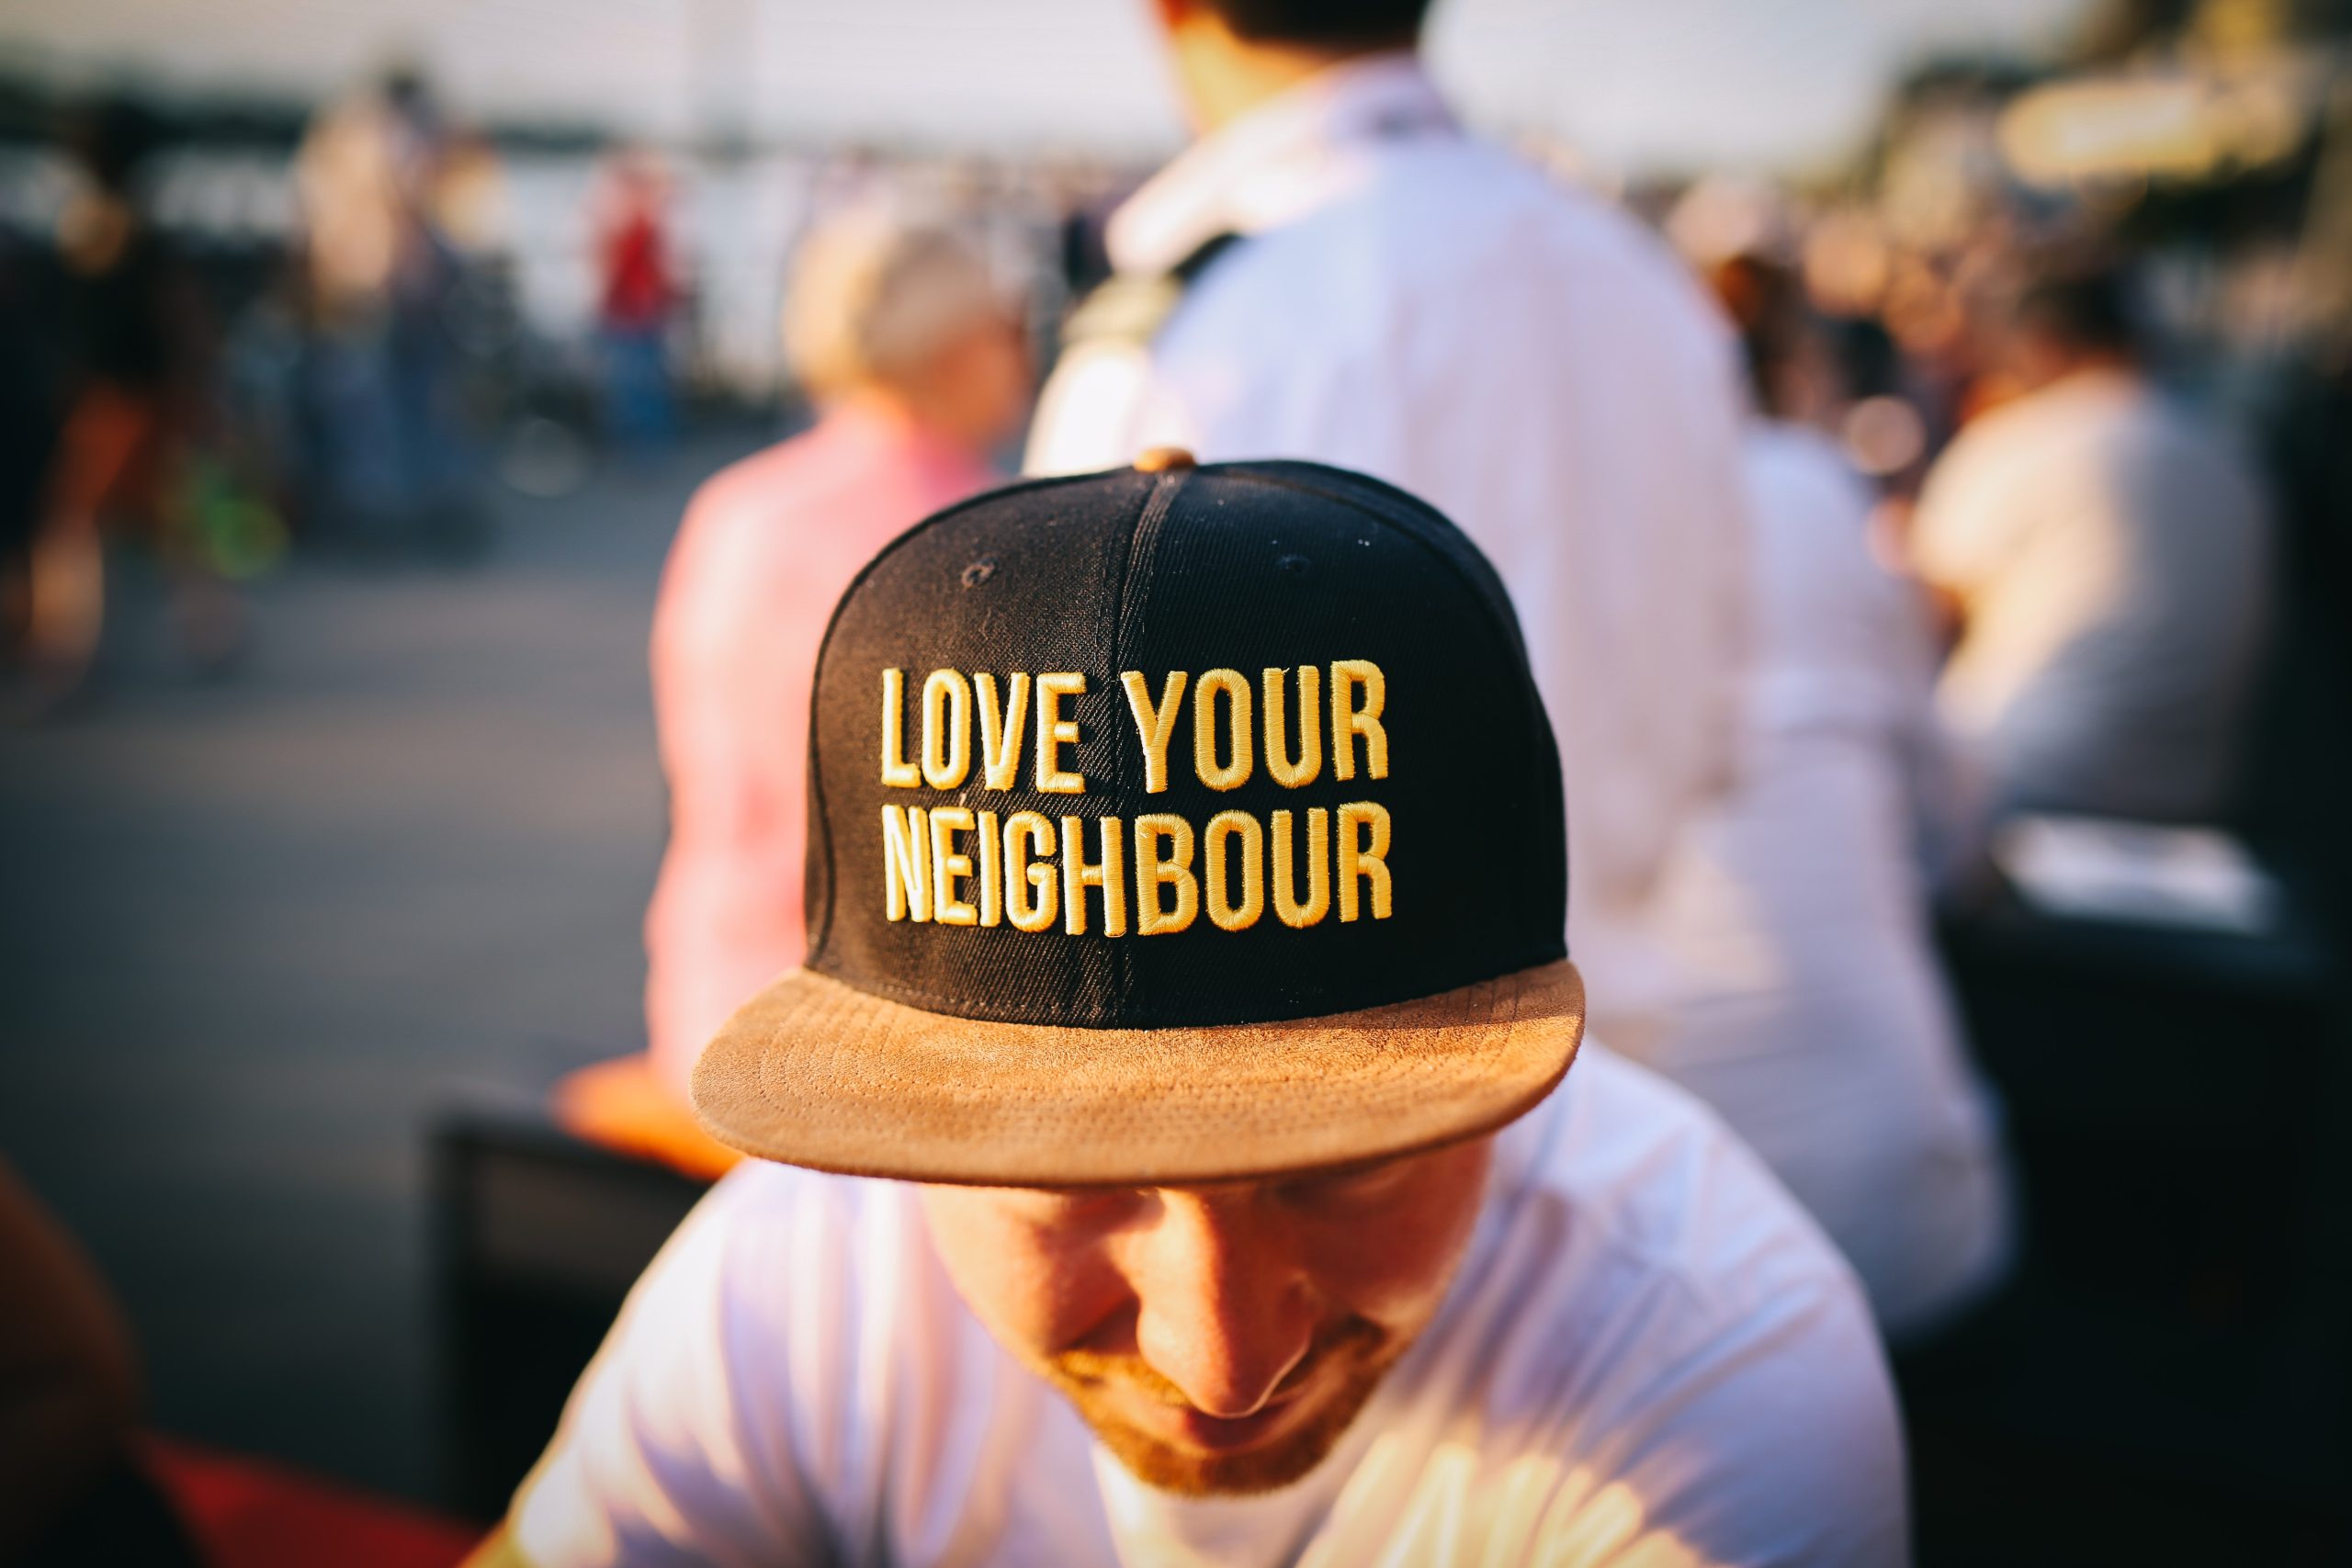 man wearing "love your neighbour" hat